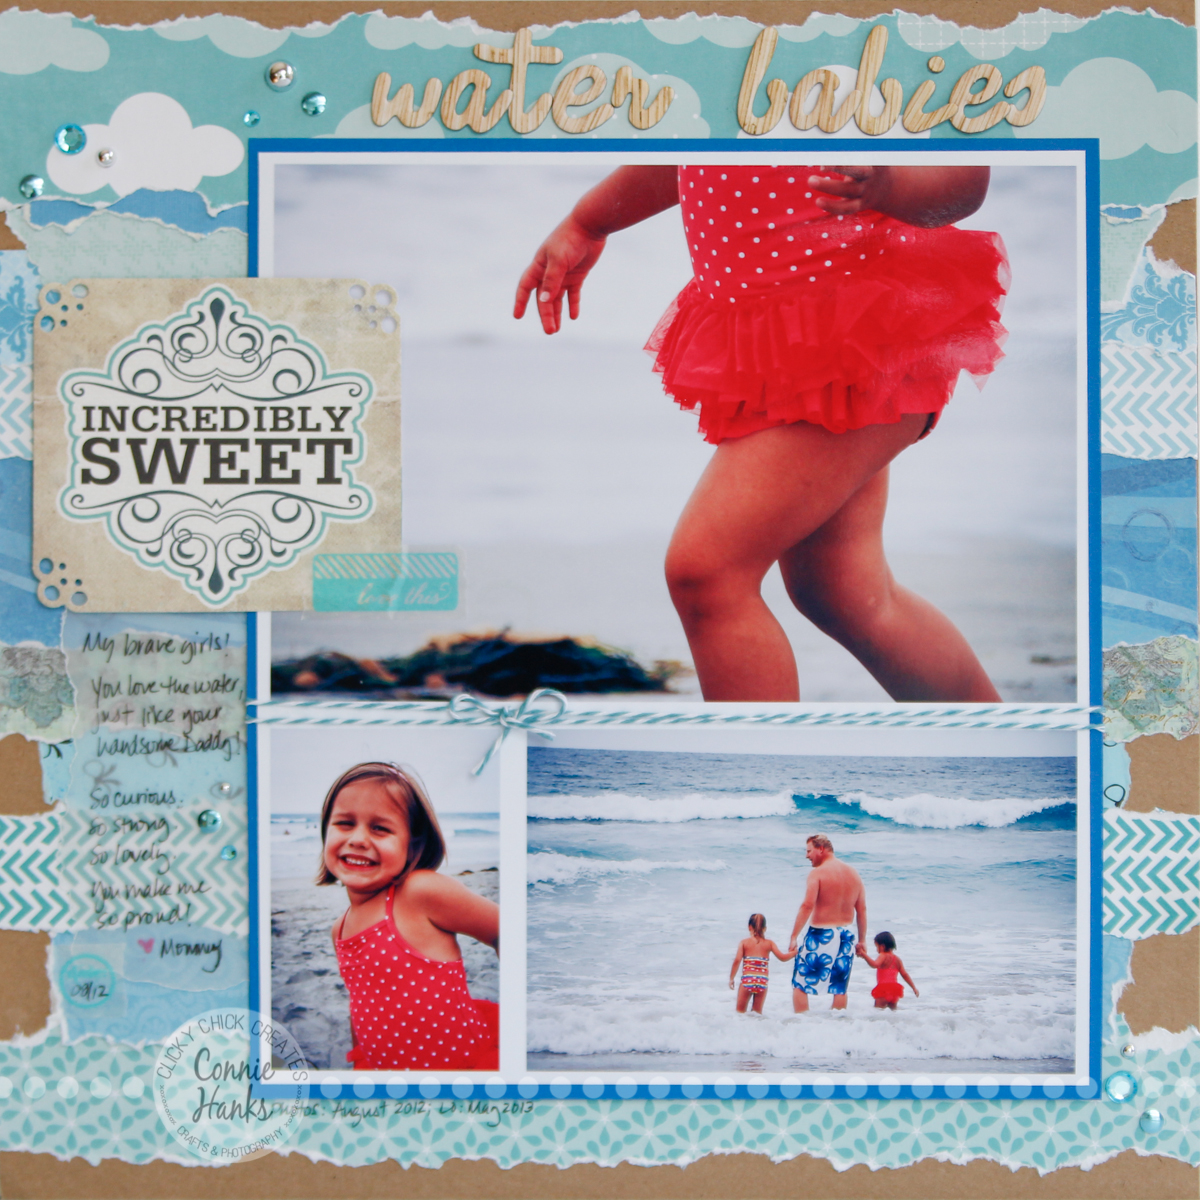 Connie Hanks Photography // ClickyChickCreates.com // Water Babies beach scrapbook layout using torn strips of patterned paper